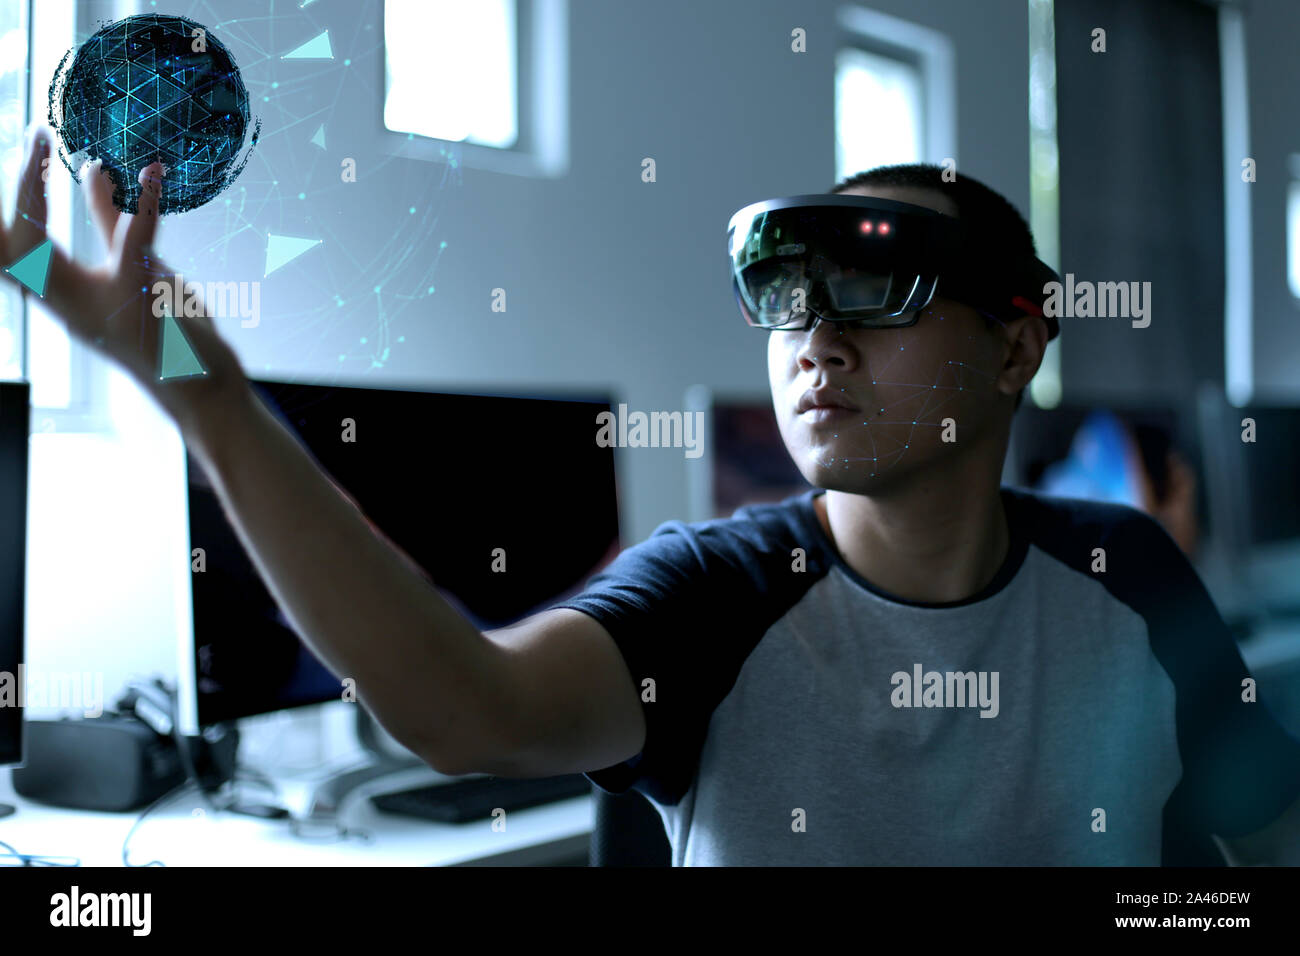 Student experience Virtual Reality with HoloLens glasses. Mixed reality future technology concept Stock Photo